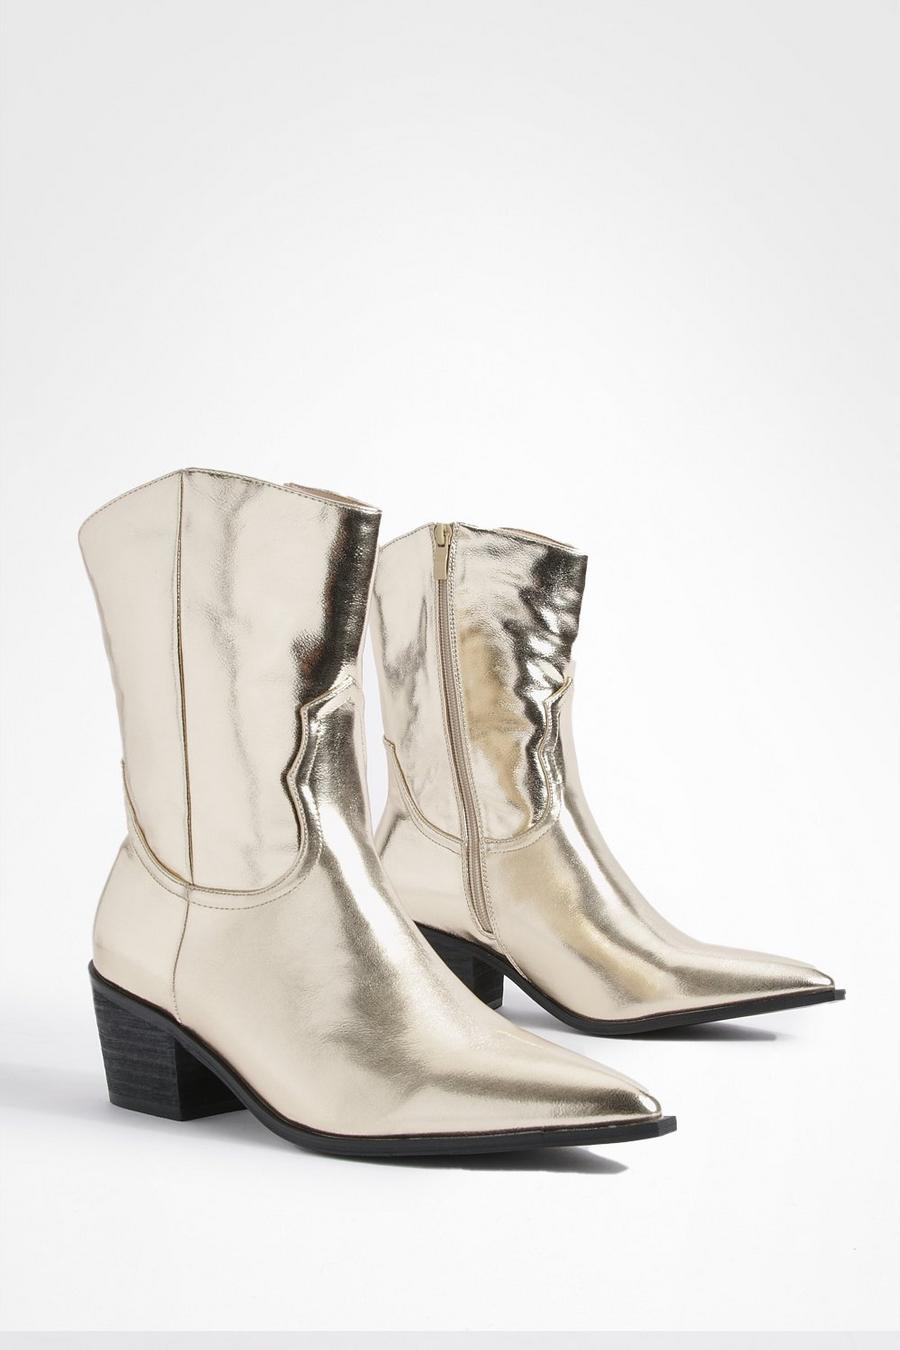 Gold metallic Wide Fit Metallic Western Ankle Cowboy Boots